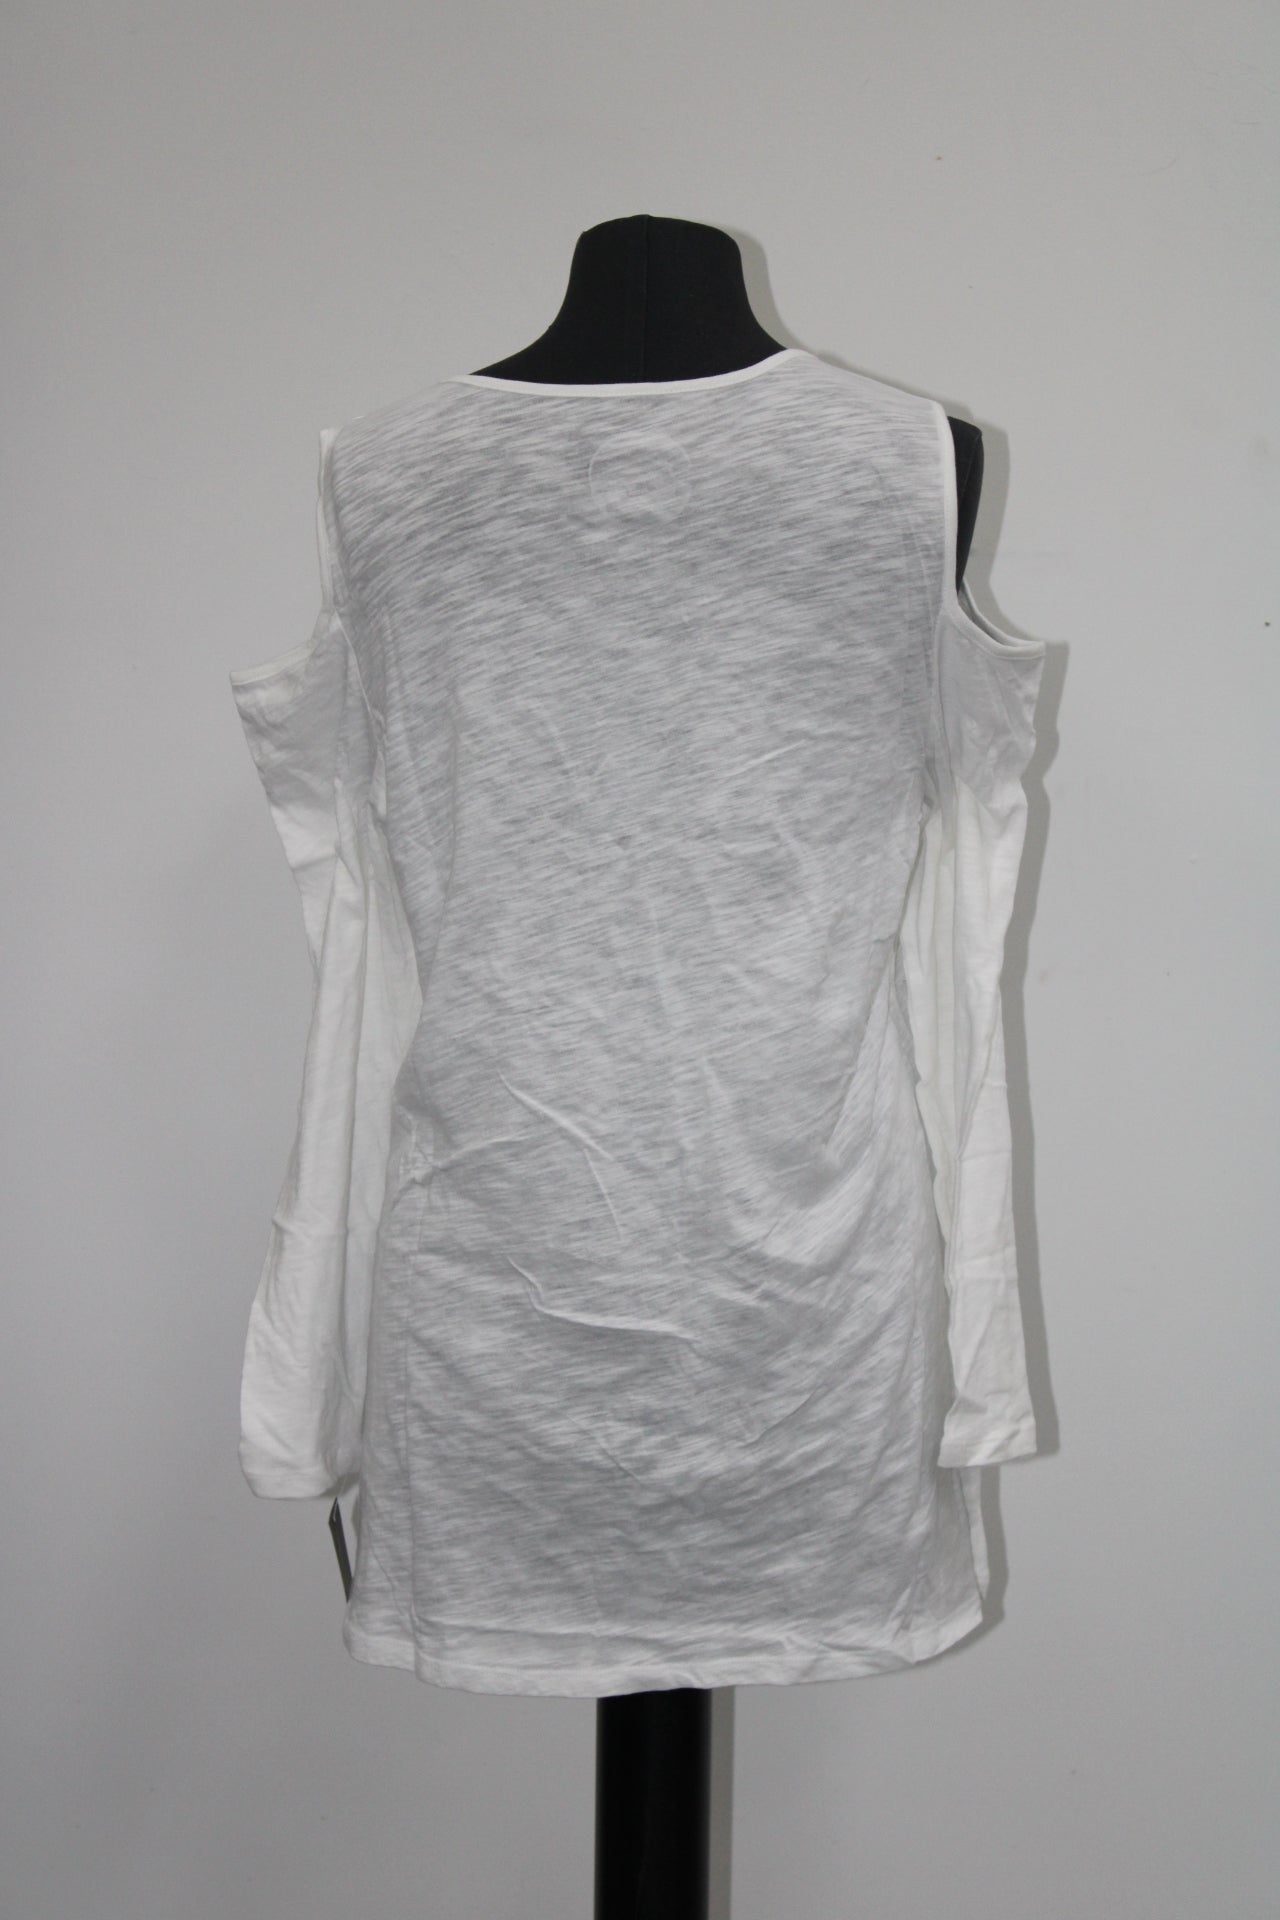 INC International Concepts Petite Solid Cold-Shoulder Top Washed White PXL